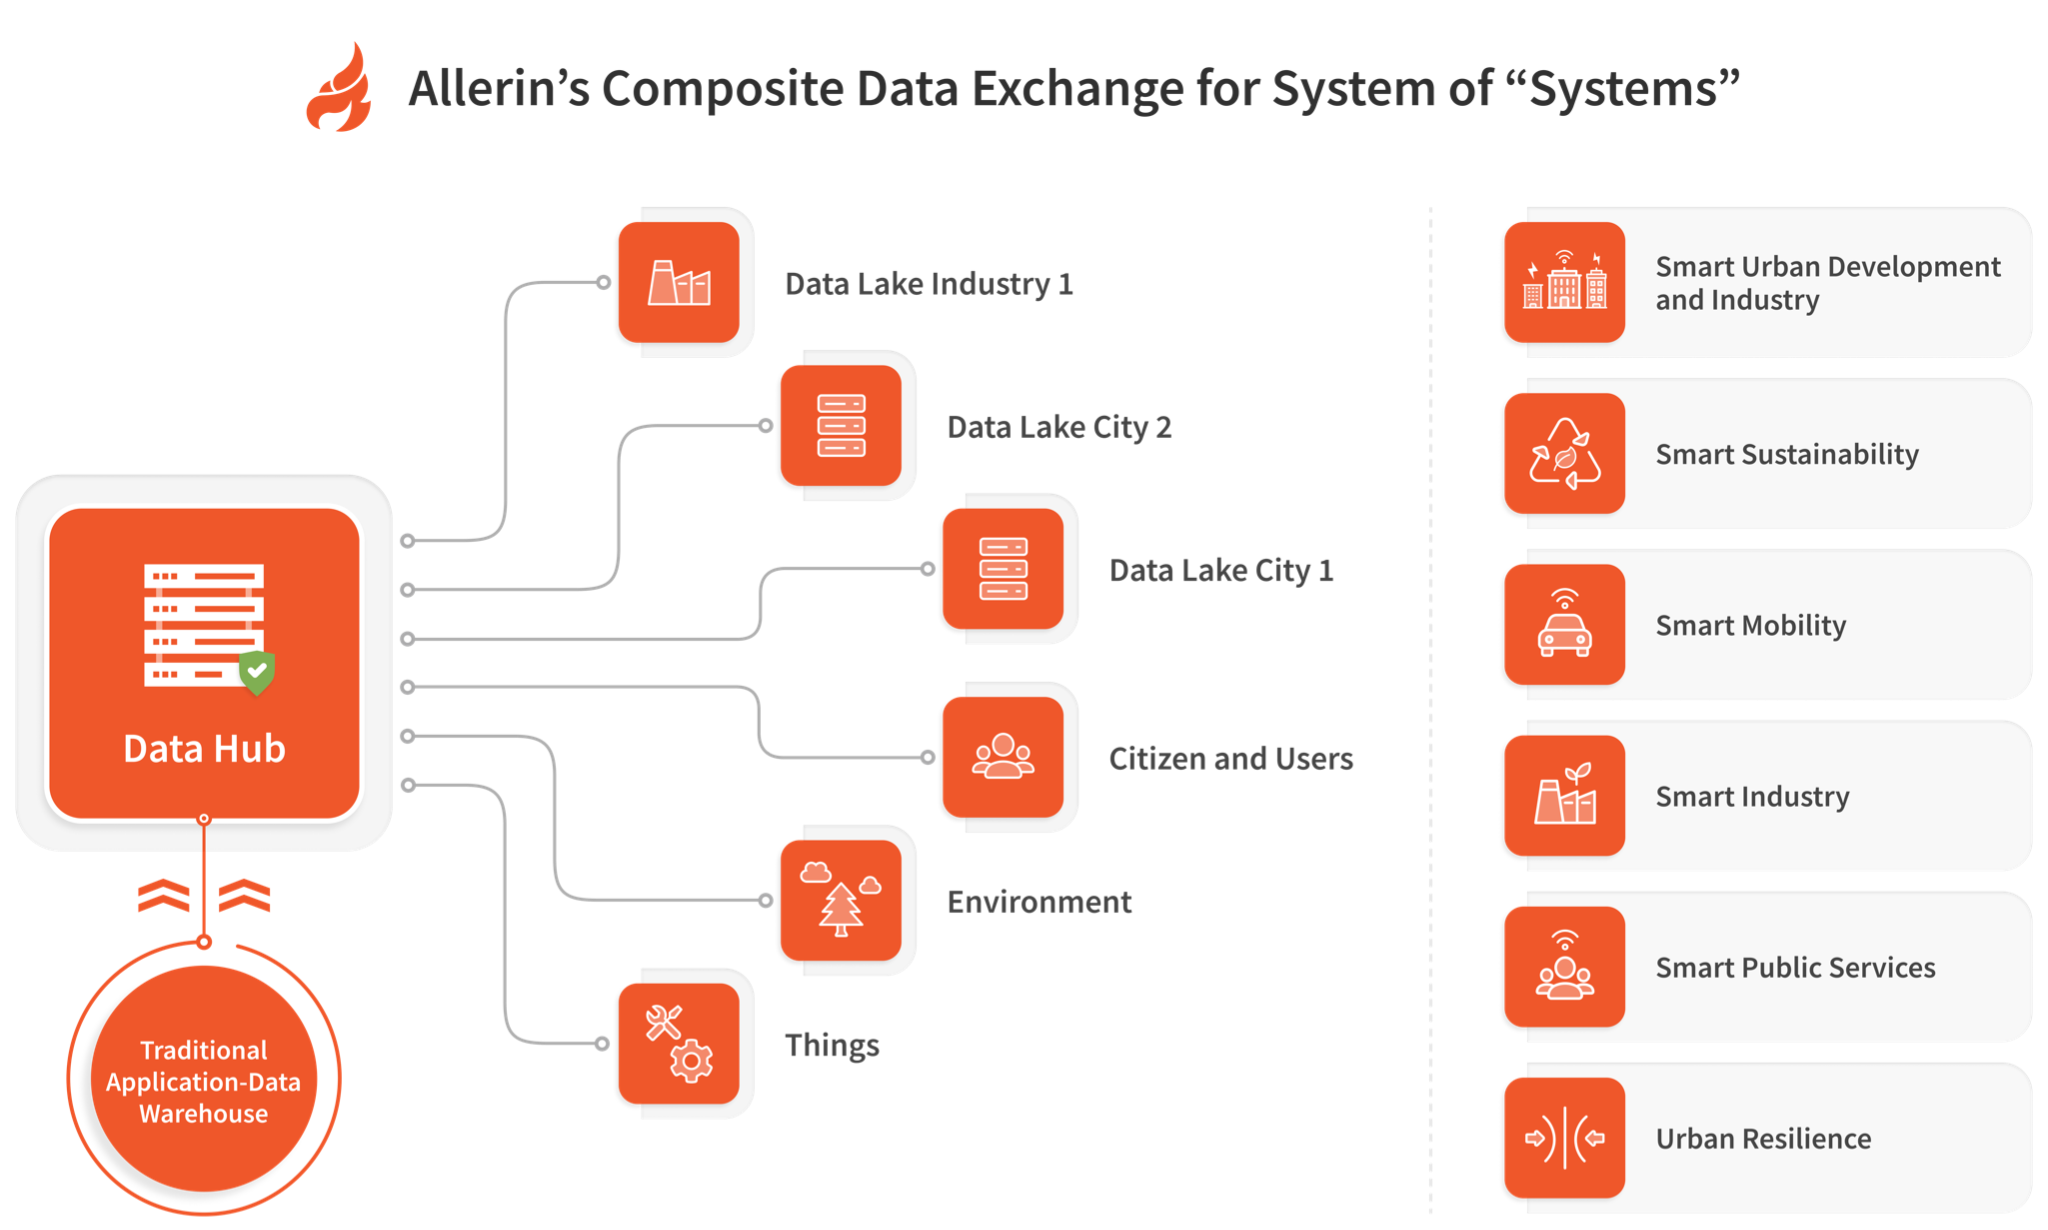 Allerin's Composite Data Exchange for System of Systems